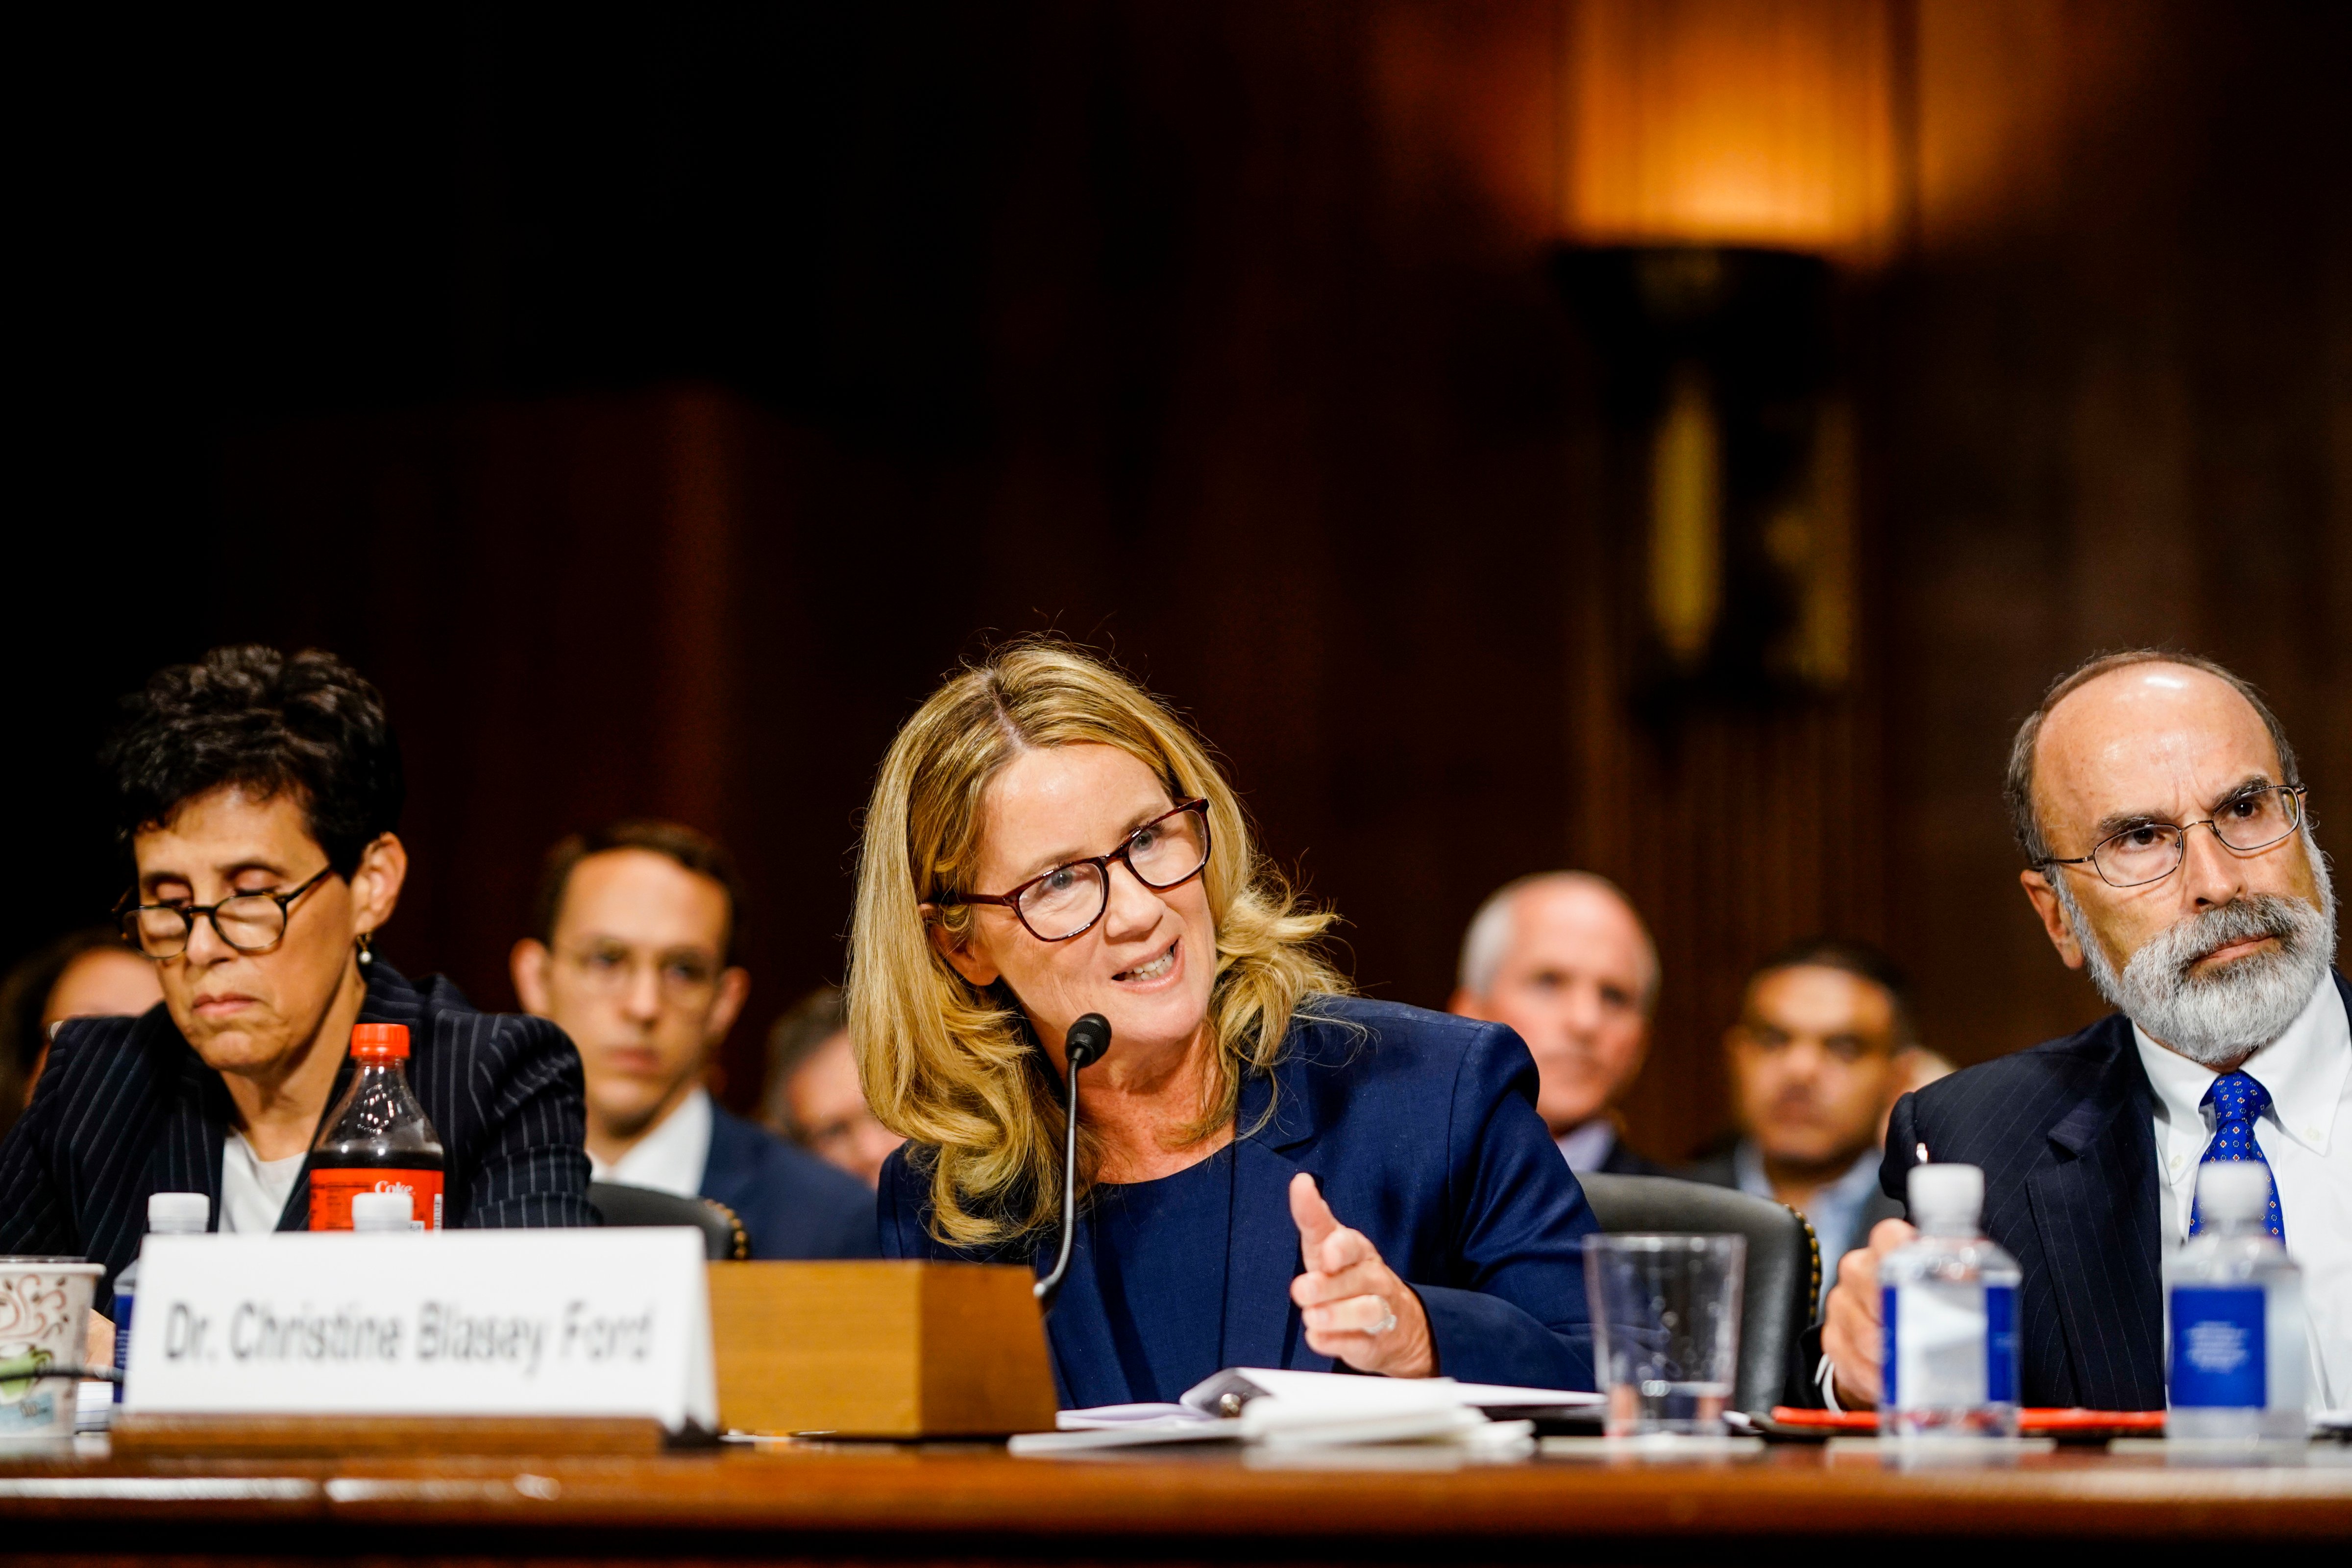 Christine Blasey Ford speaks before the Senate Judiciary Committee hearing  in the Dirksen Senate Office Building on Capitol Hill September 27, 2018 in Washington, DC. (Pool—Getty Images)